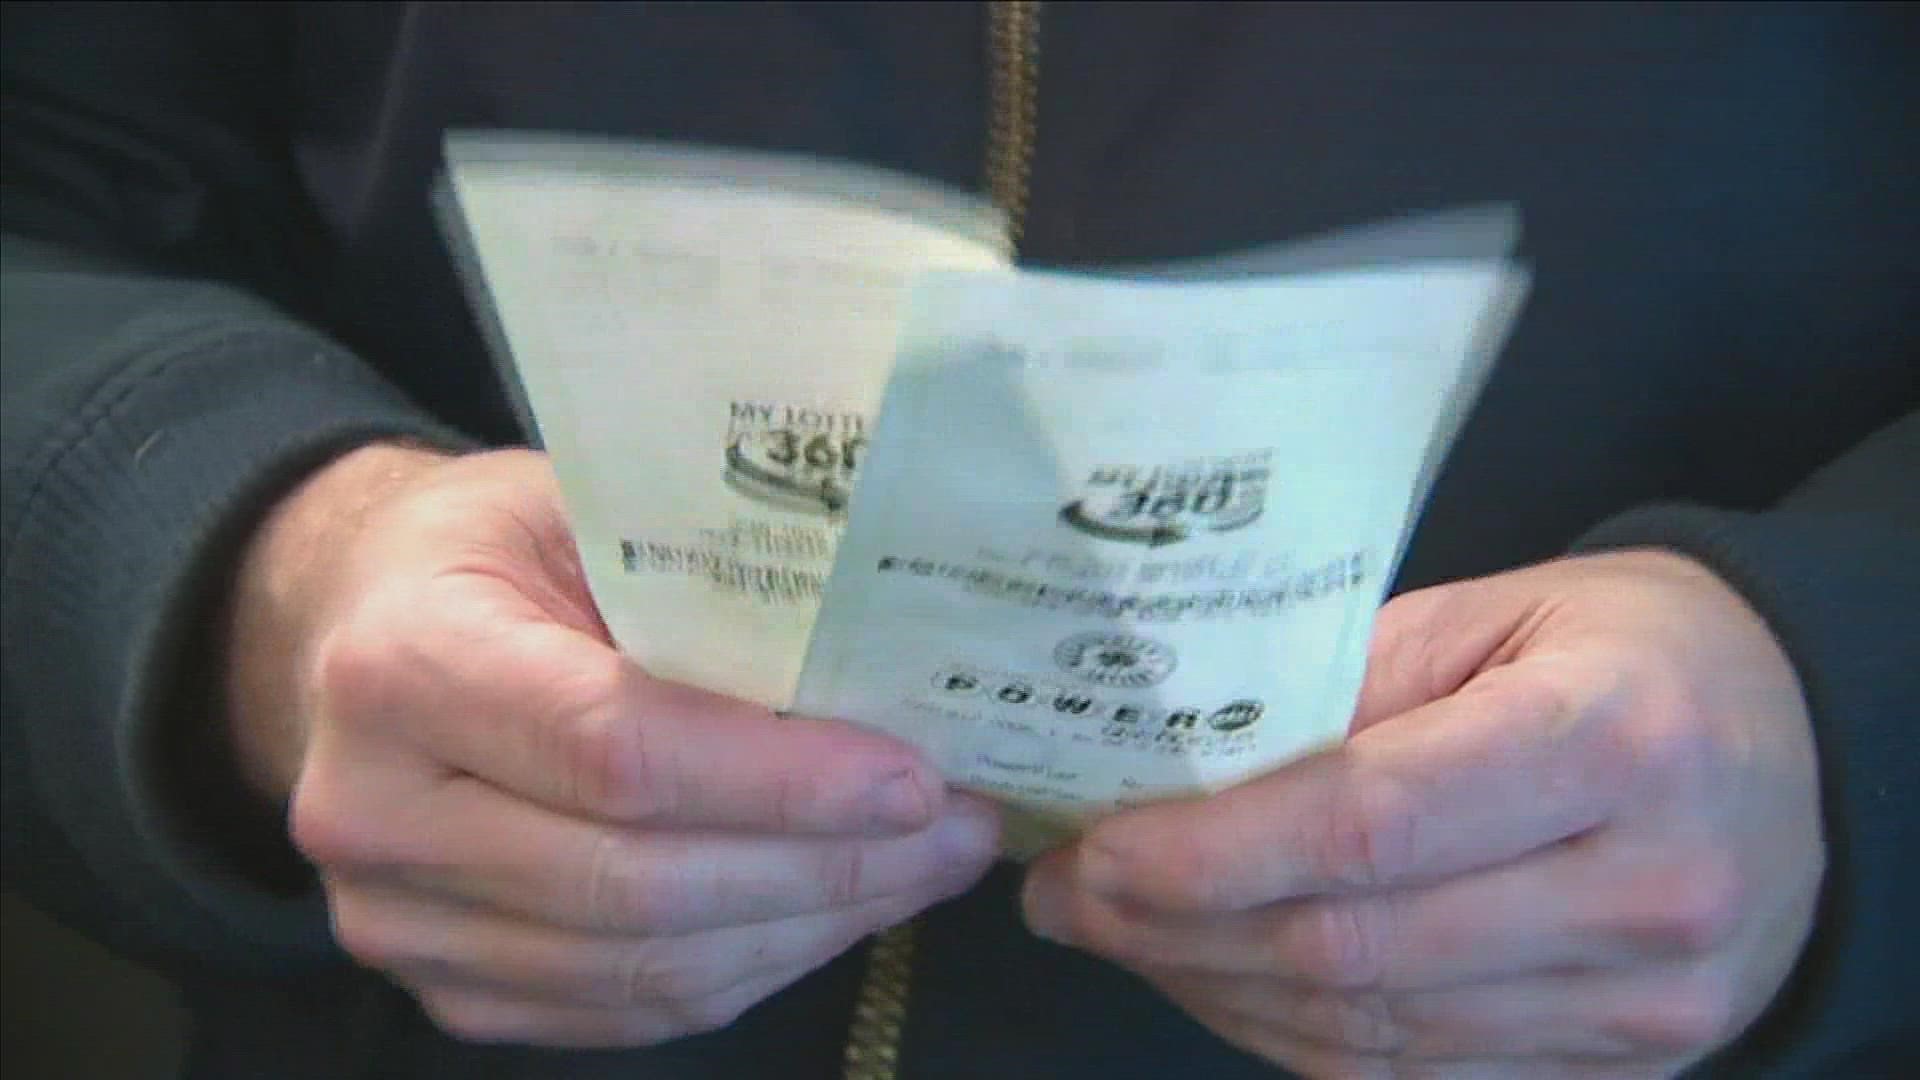 Lottery officials said the winning ticket was sold at Classic Mart on North Cleveland Street.